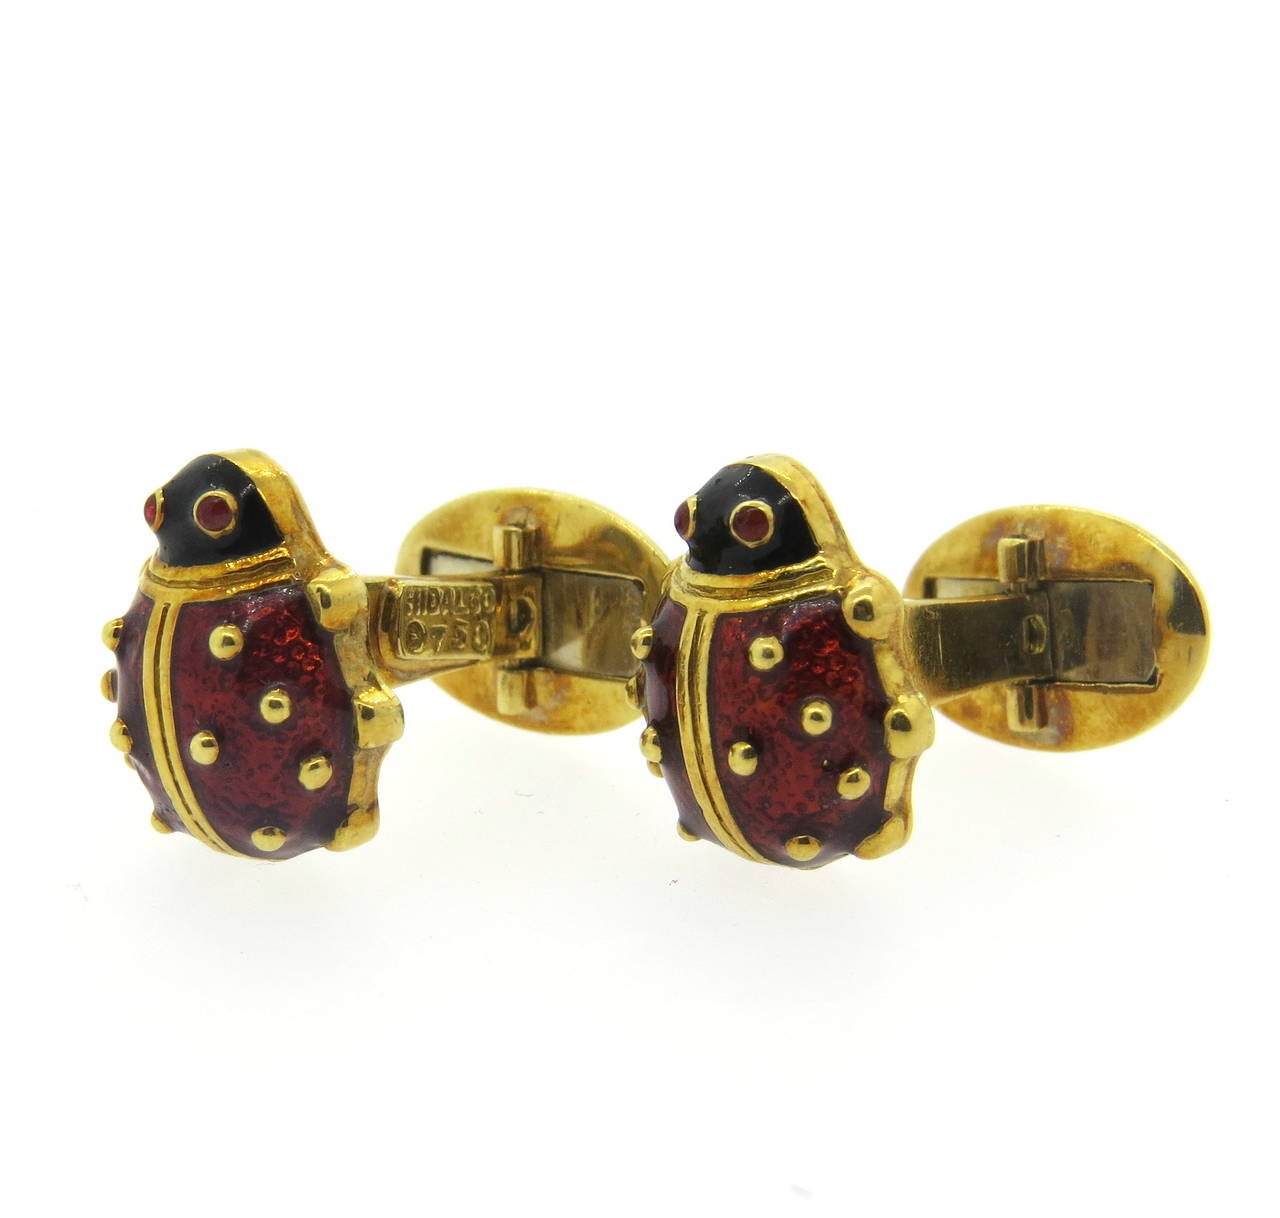 A pair of 18k yellow gold cufflinks coated with red enamel depicting ladybugs with garnet eyes.  Crafted by Hidalgo, the cufflinks measure 16mm x 13.8mm and weigh 15.0 grams.  Marked: Hidalgo, 750